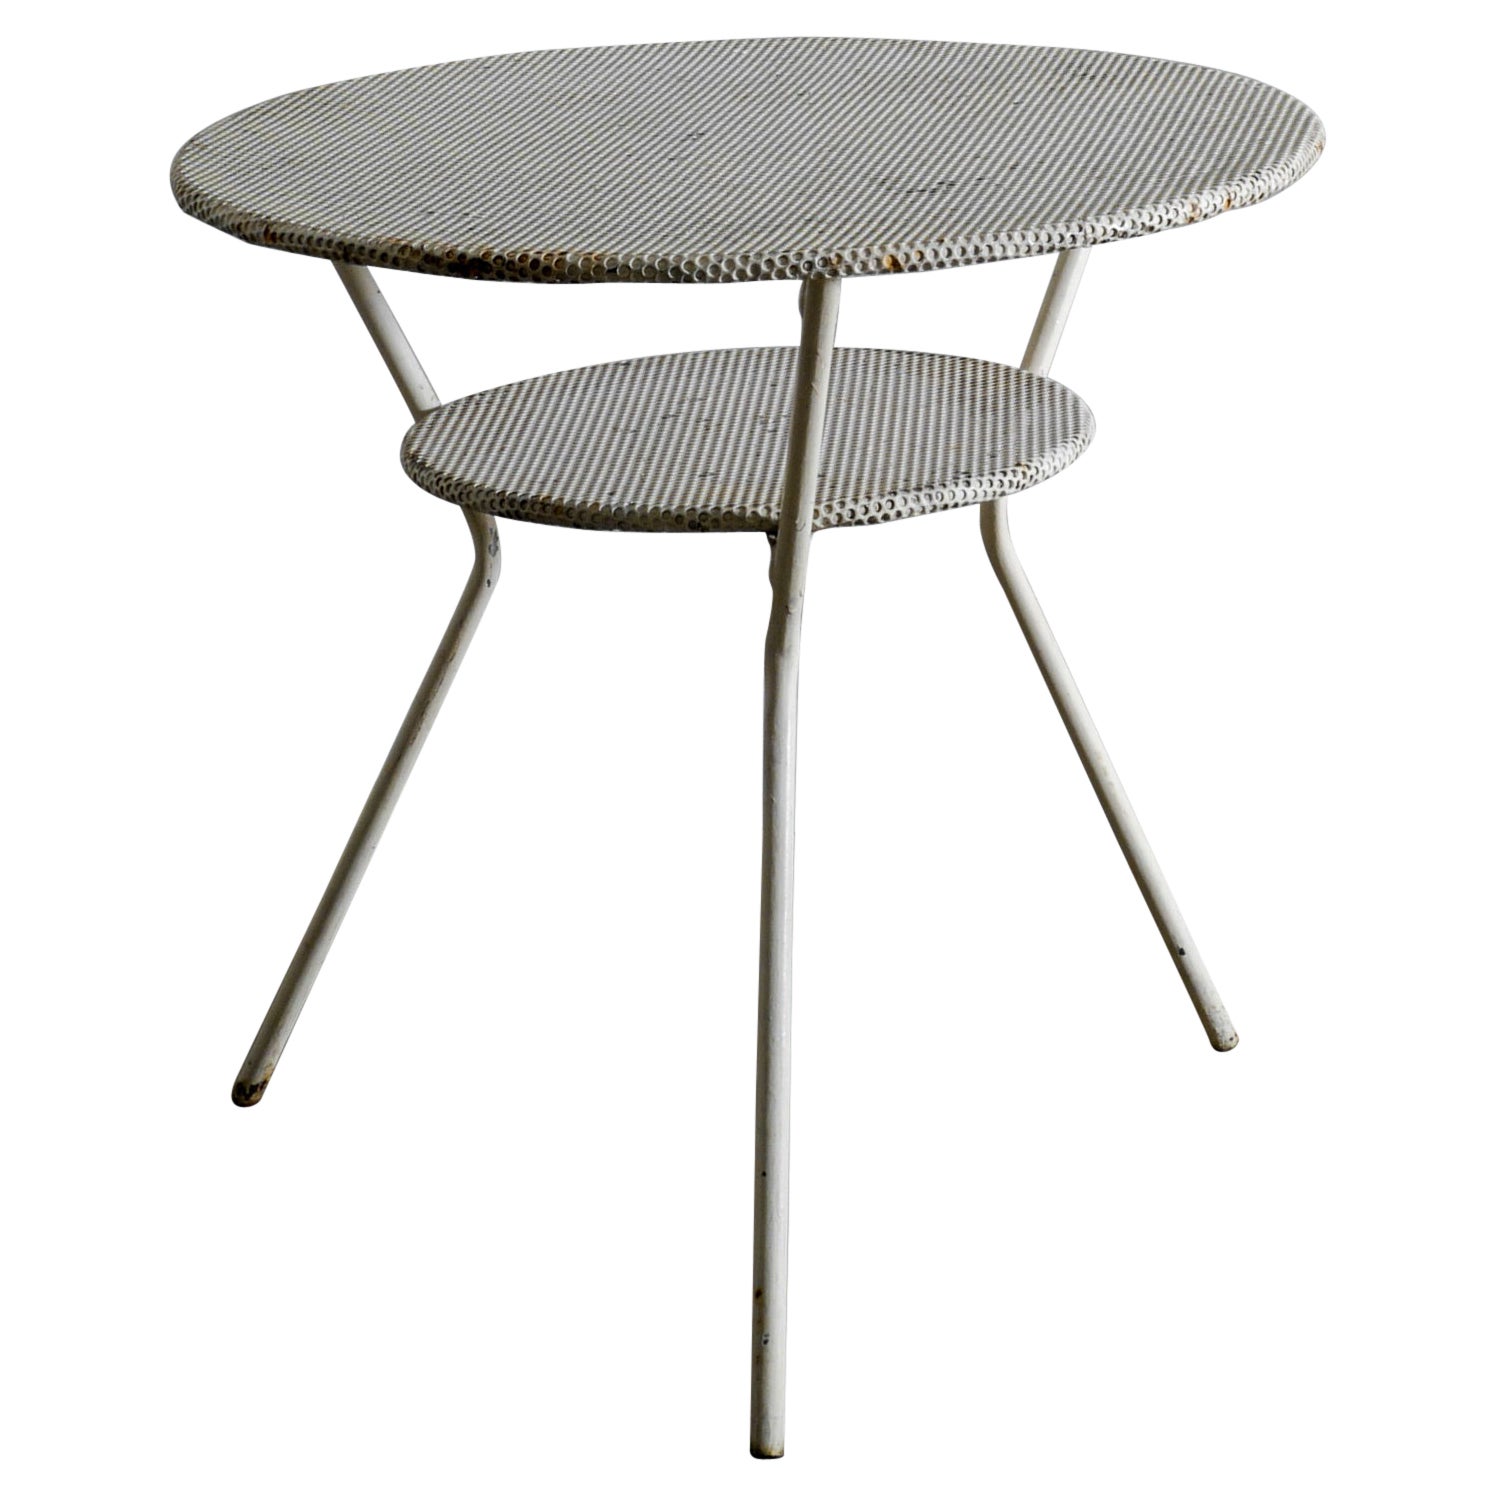 Metal Café Side Table In Style Of Mathieu Matégot Produced in France, 1950s